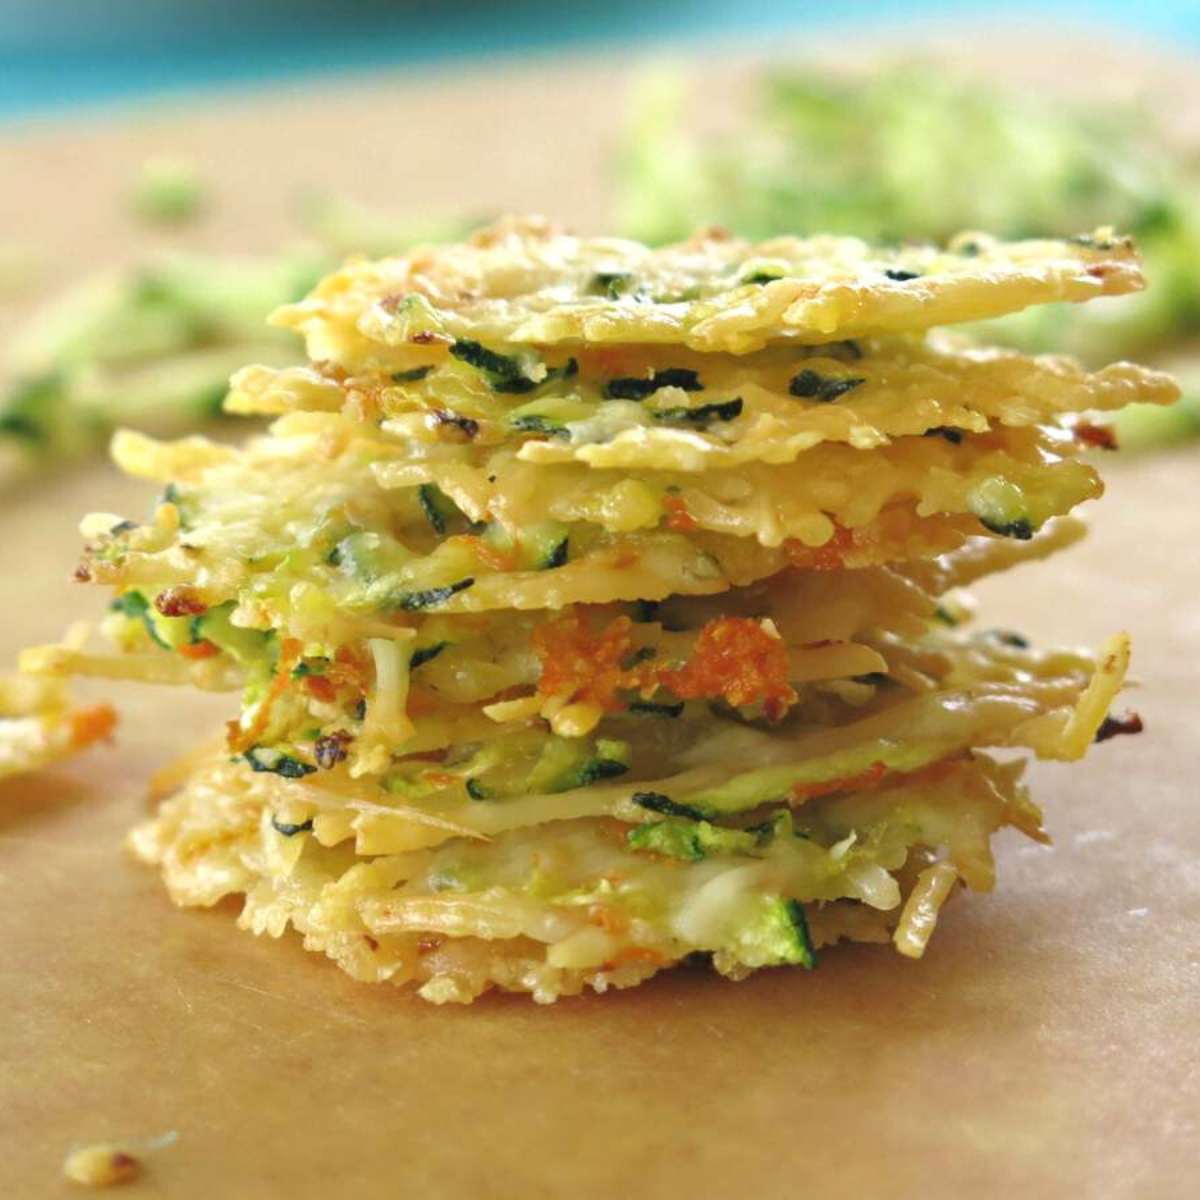 Seven Parmesan Cheese Crisps oven-baked with shredded zucchini and carrot mixed in added stacked in a pile.